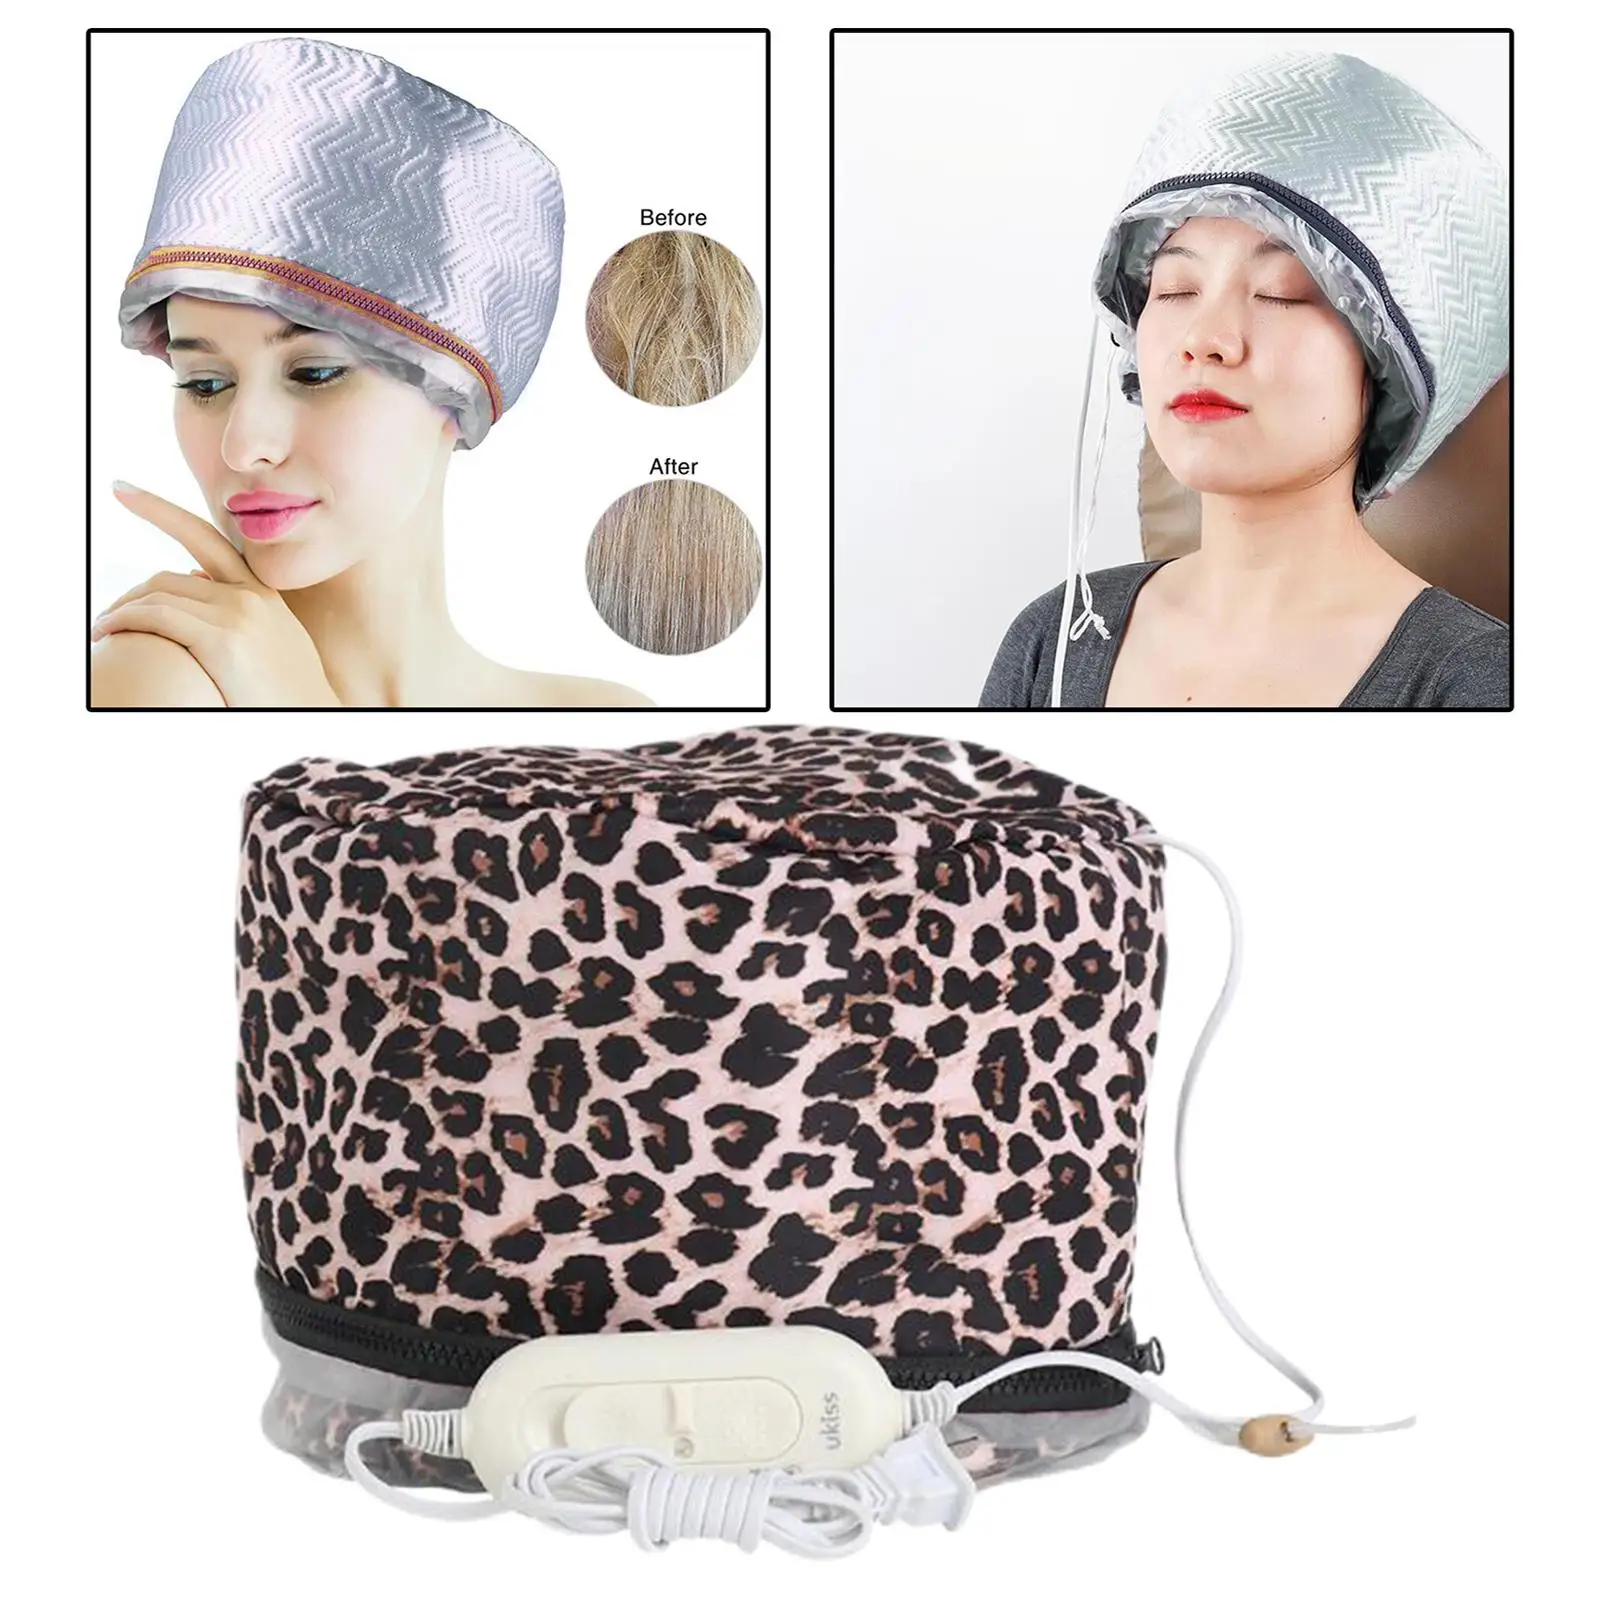 Hair Care Hat Moisturize Hair SPA Nourishing Thermal Hair Caps Personal Care 3 Modes Temperature Control Leopard Print US